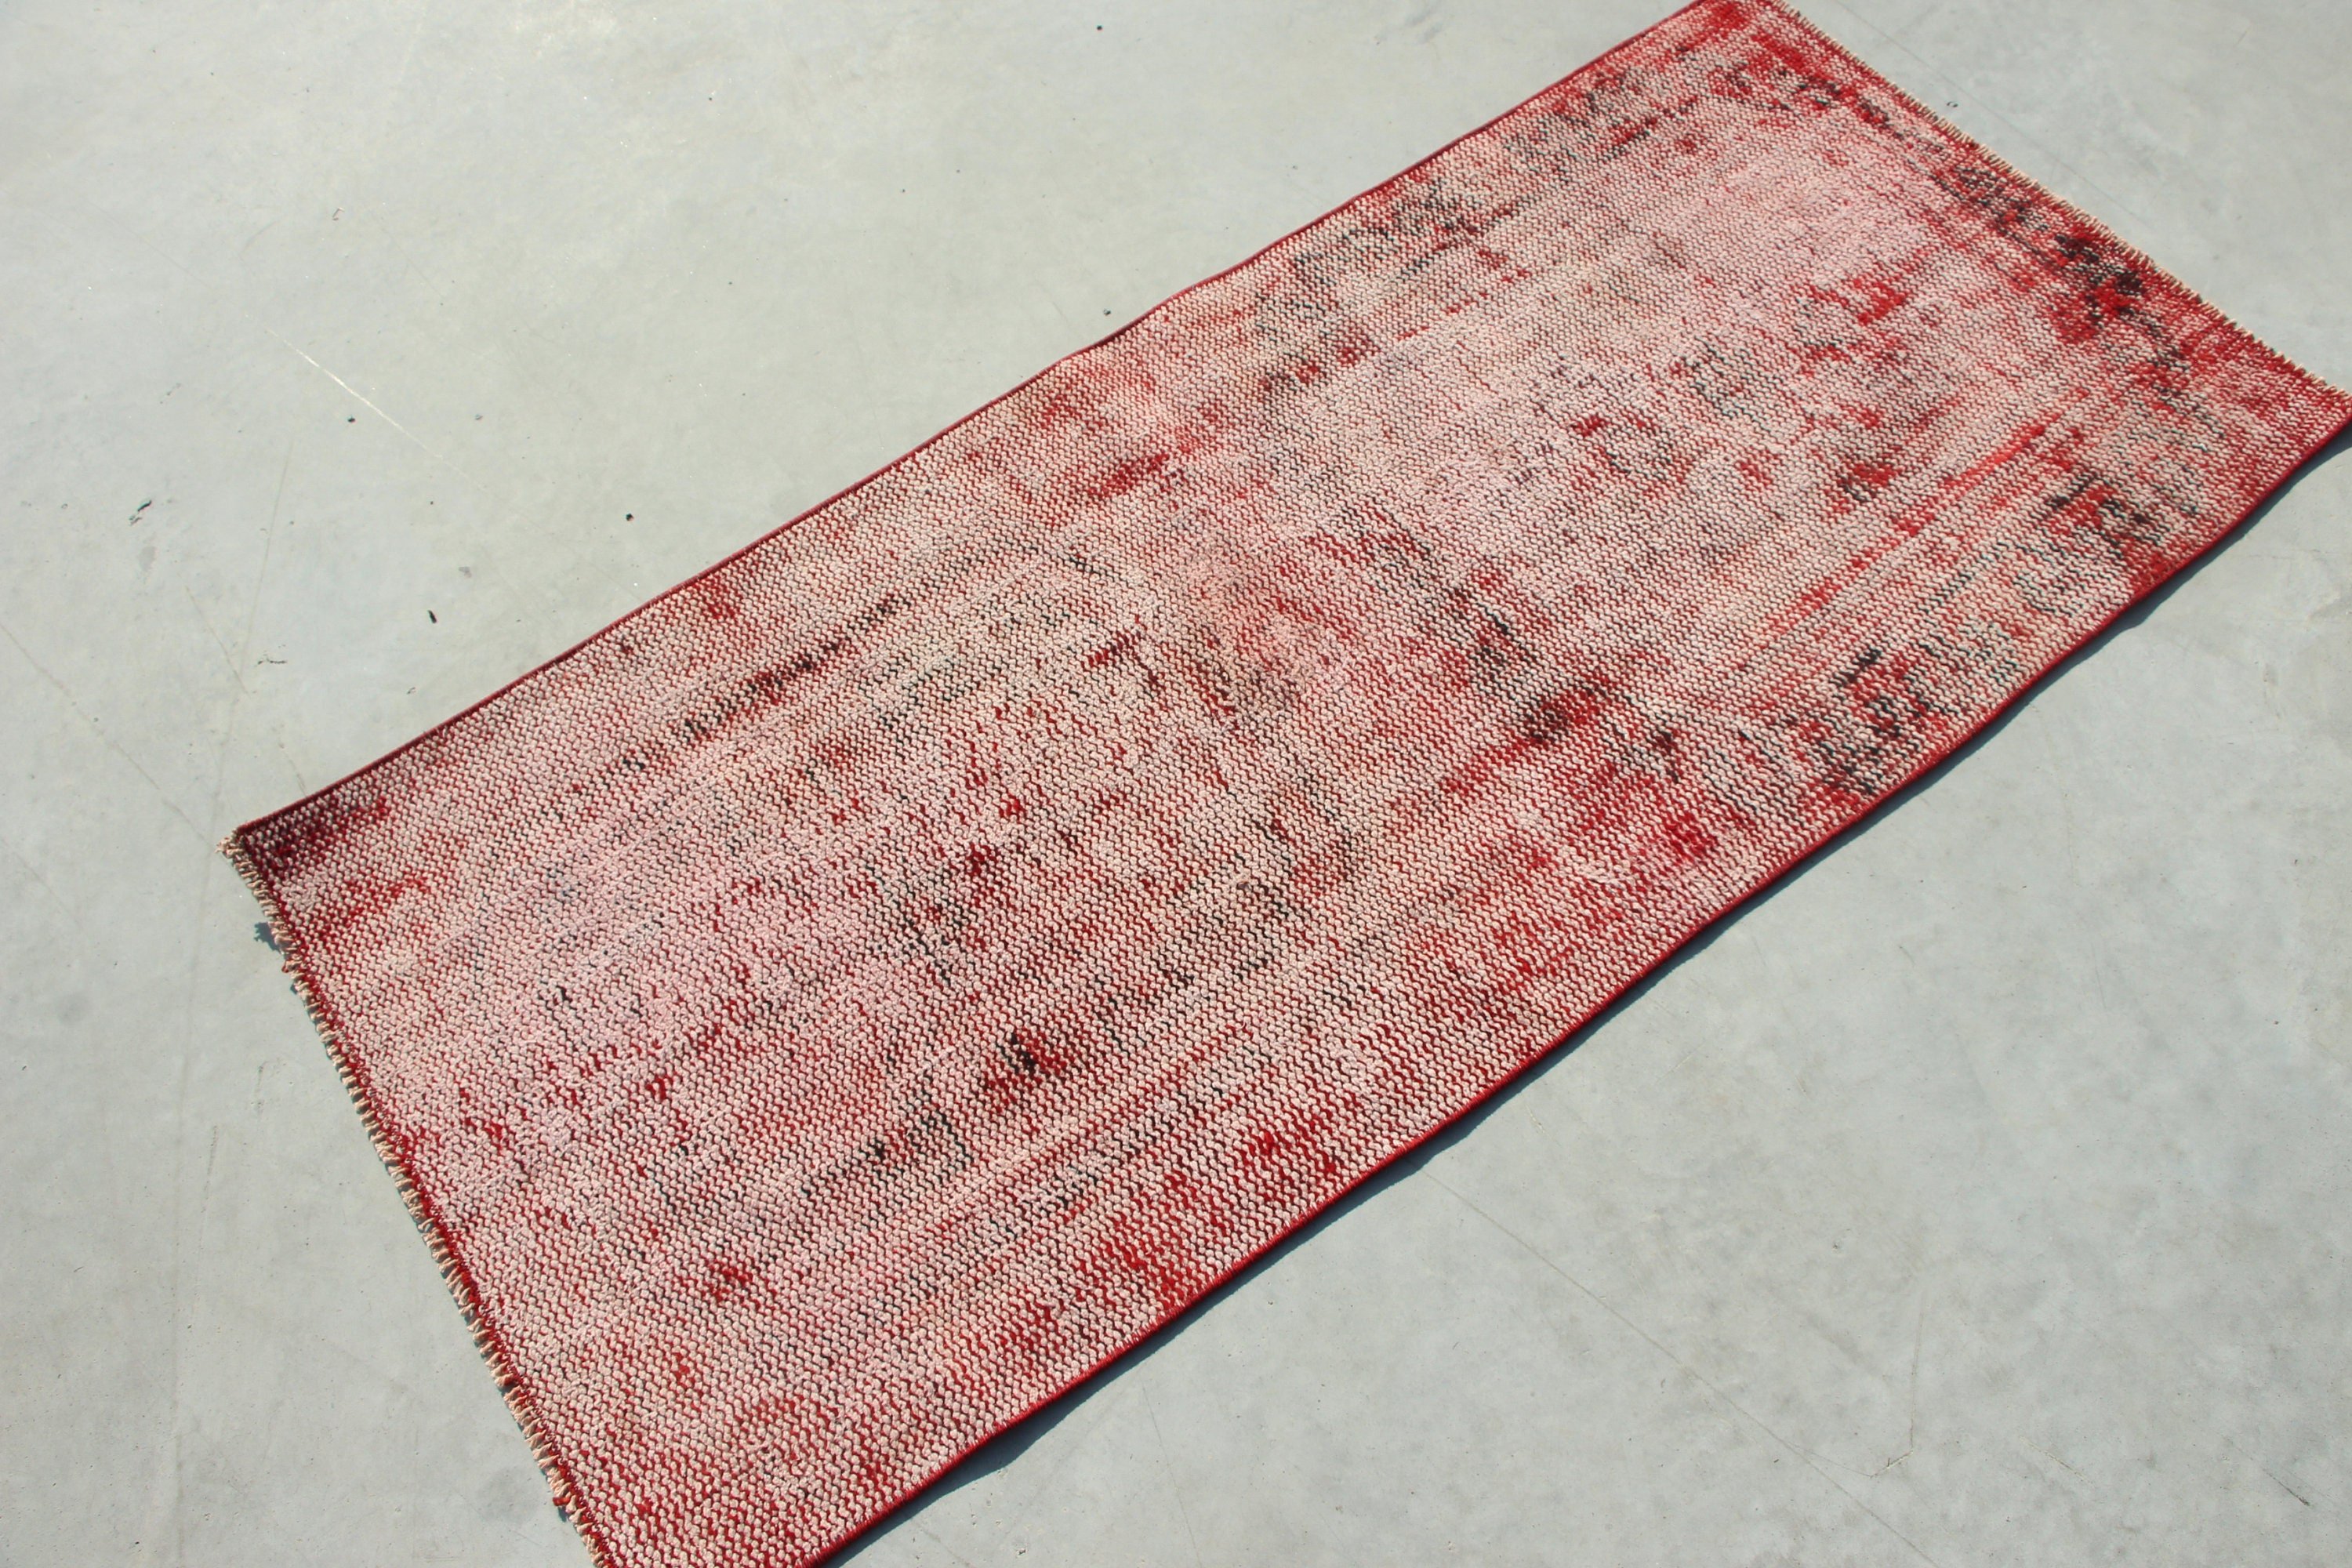 Oriental Rug, Red Home Decor Rug, 2.3x5 ft Small Rugs, Oushak Rugs, Vintage Rugs, Door Mat Rug, Turkish Rugs, Organic Rugs, Kitchen Rugs